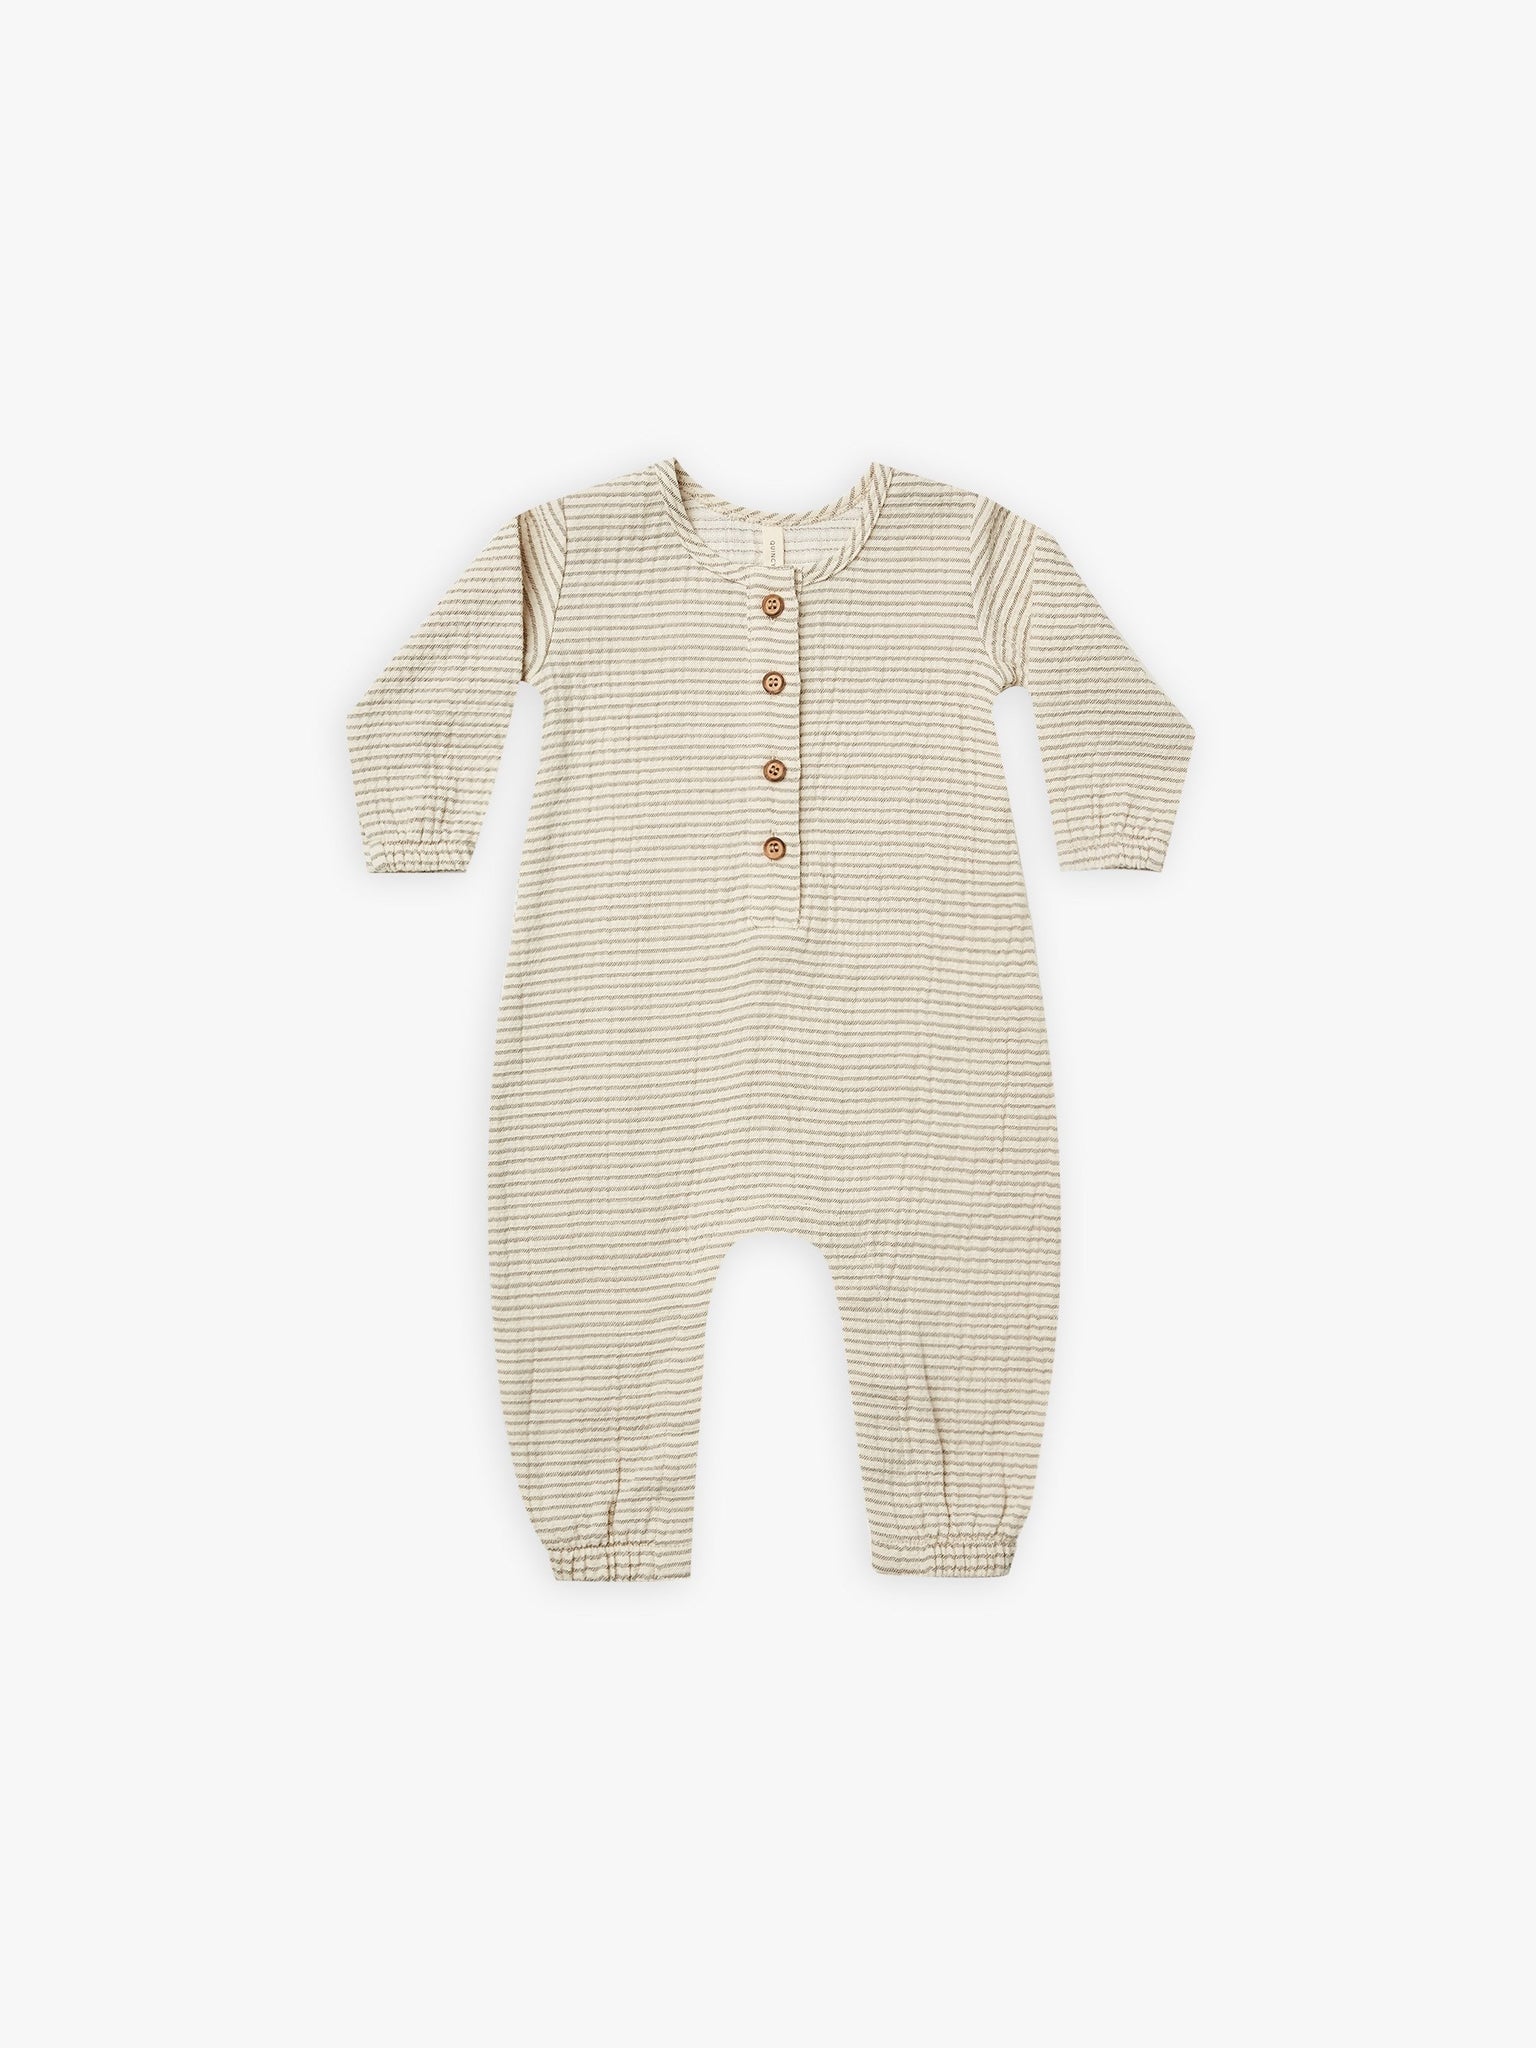 *Quincy Mae Woven Jumpsuit